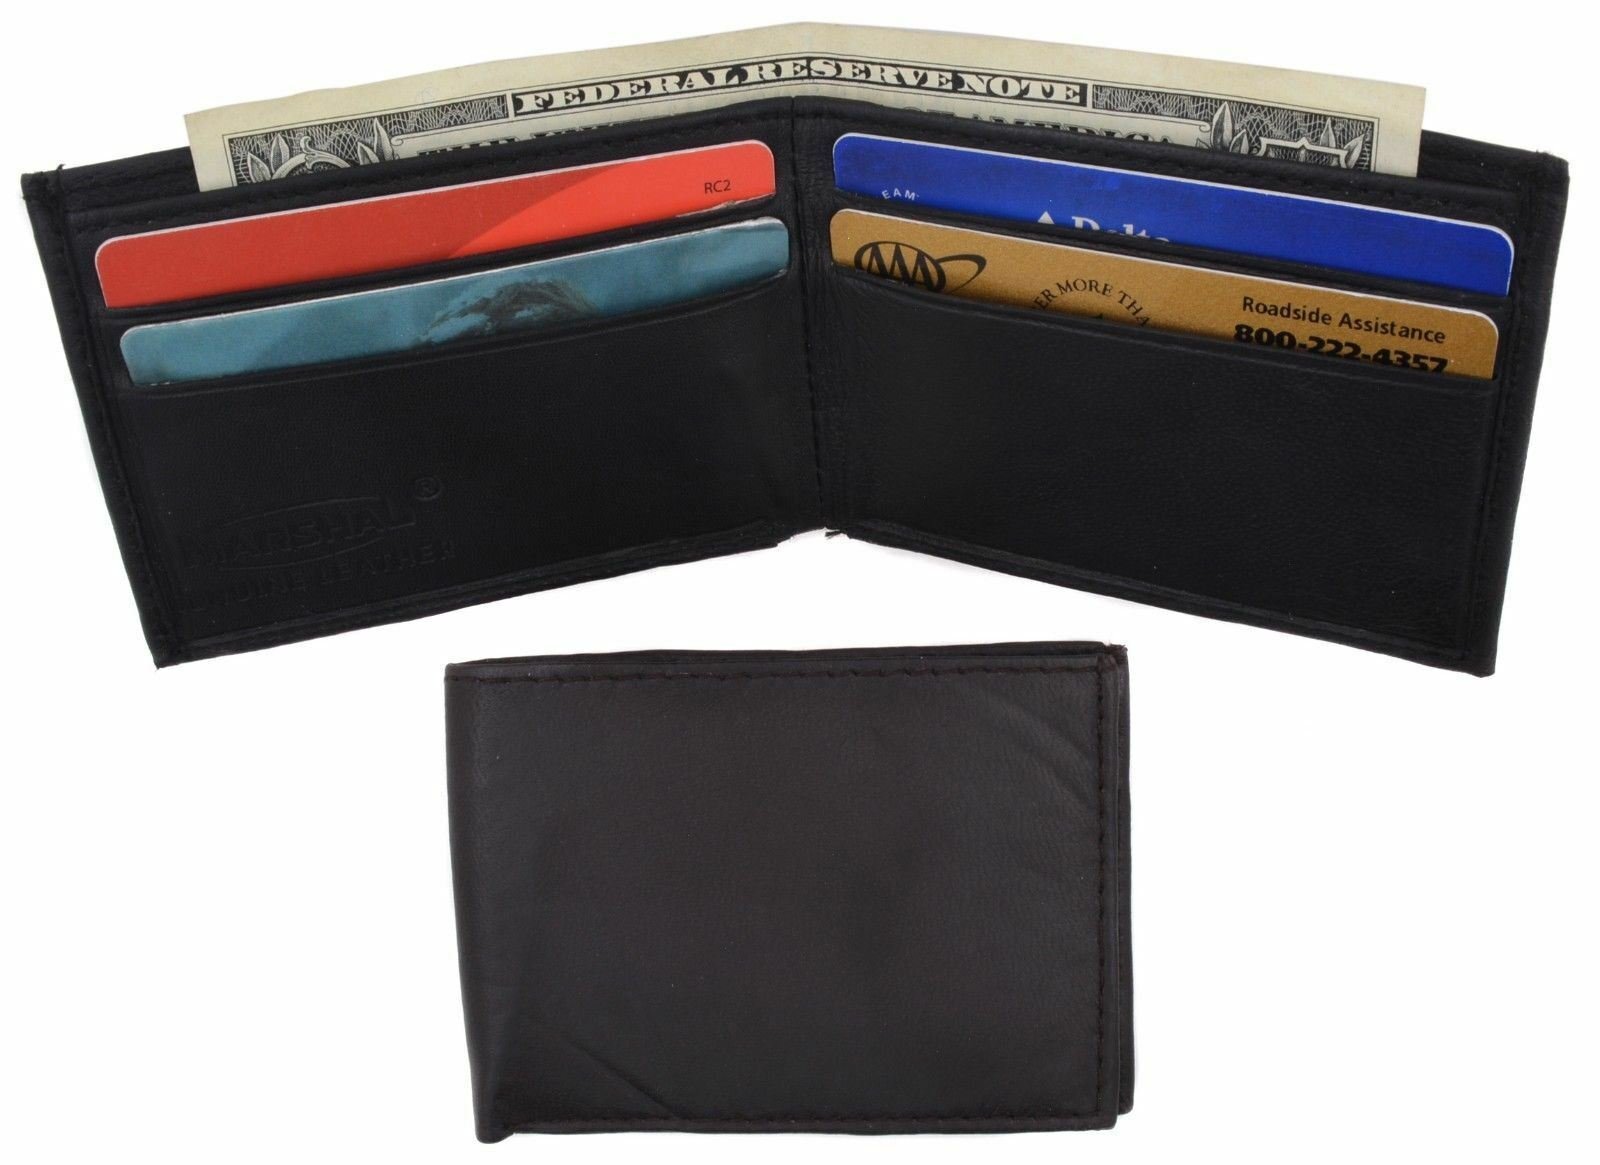 KIDS WALLET SMALL BIFOLD NEW BLACK VERY CUTE WALLET GIFT IDEA FREE SHIPPING